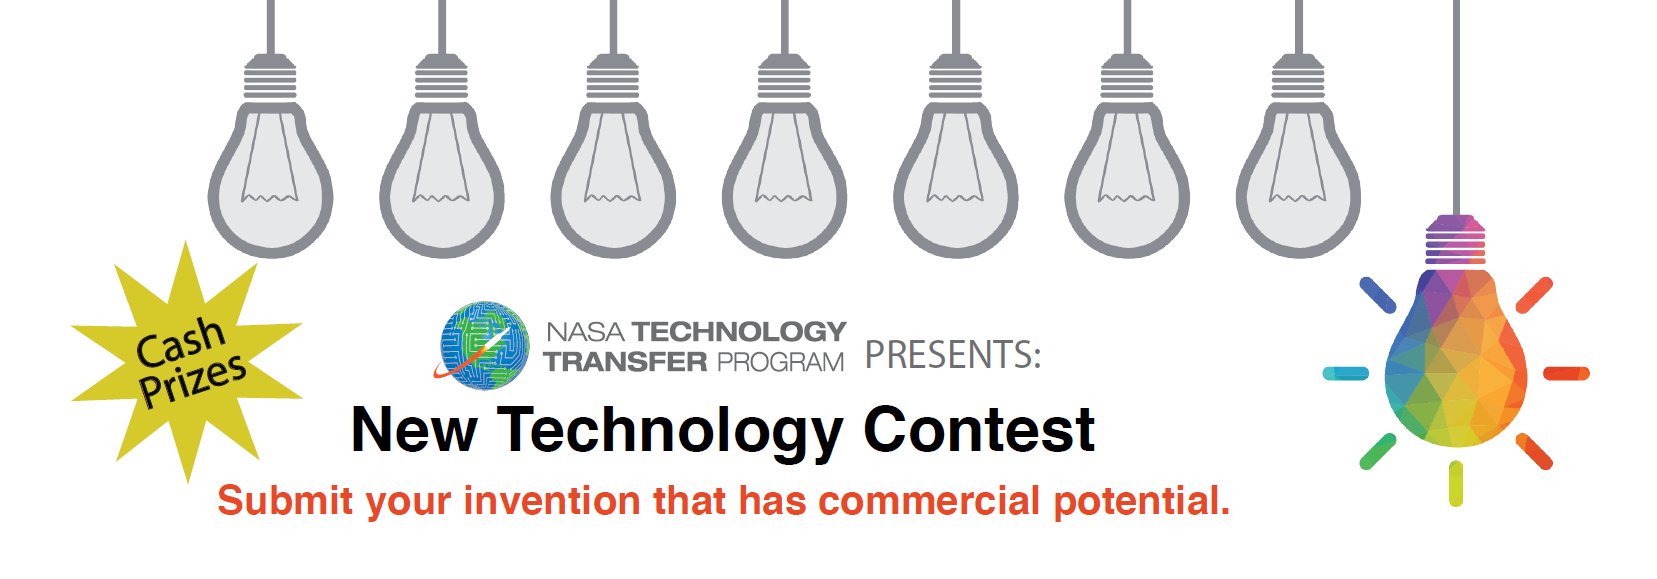 New Technology Contest graphic.